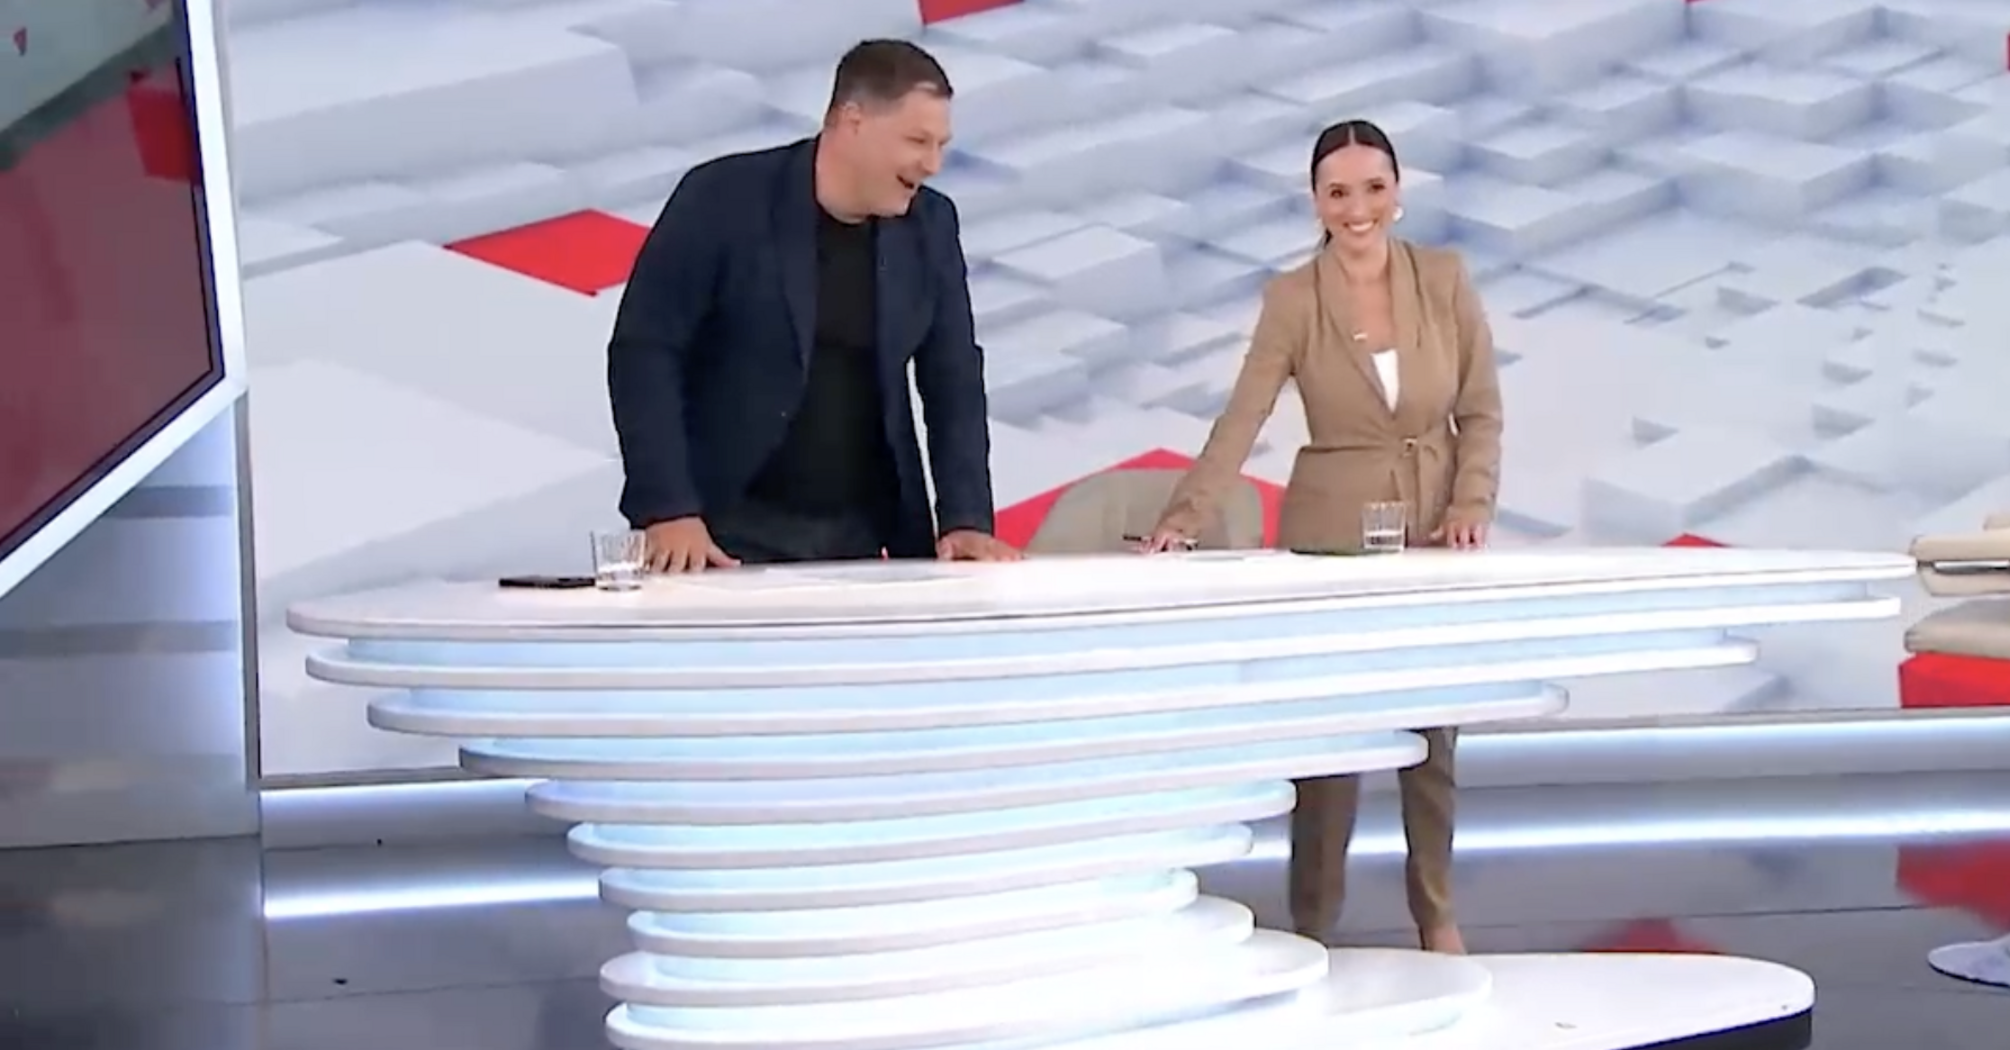 A table 'ran away' from the 1+1 hosts on air. Video of the embarrassment